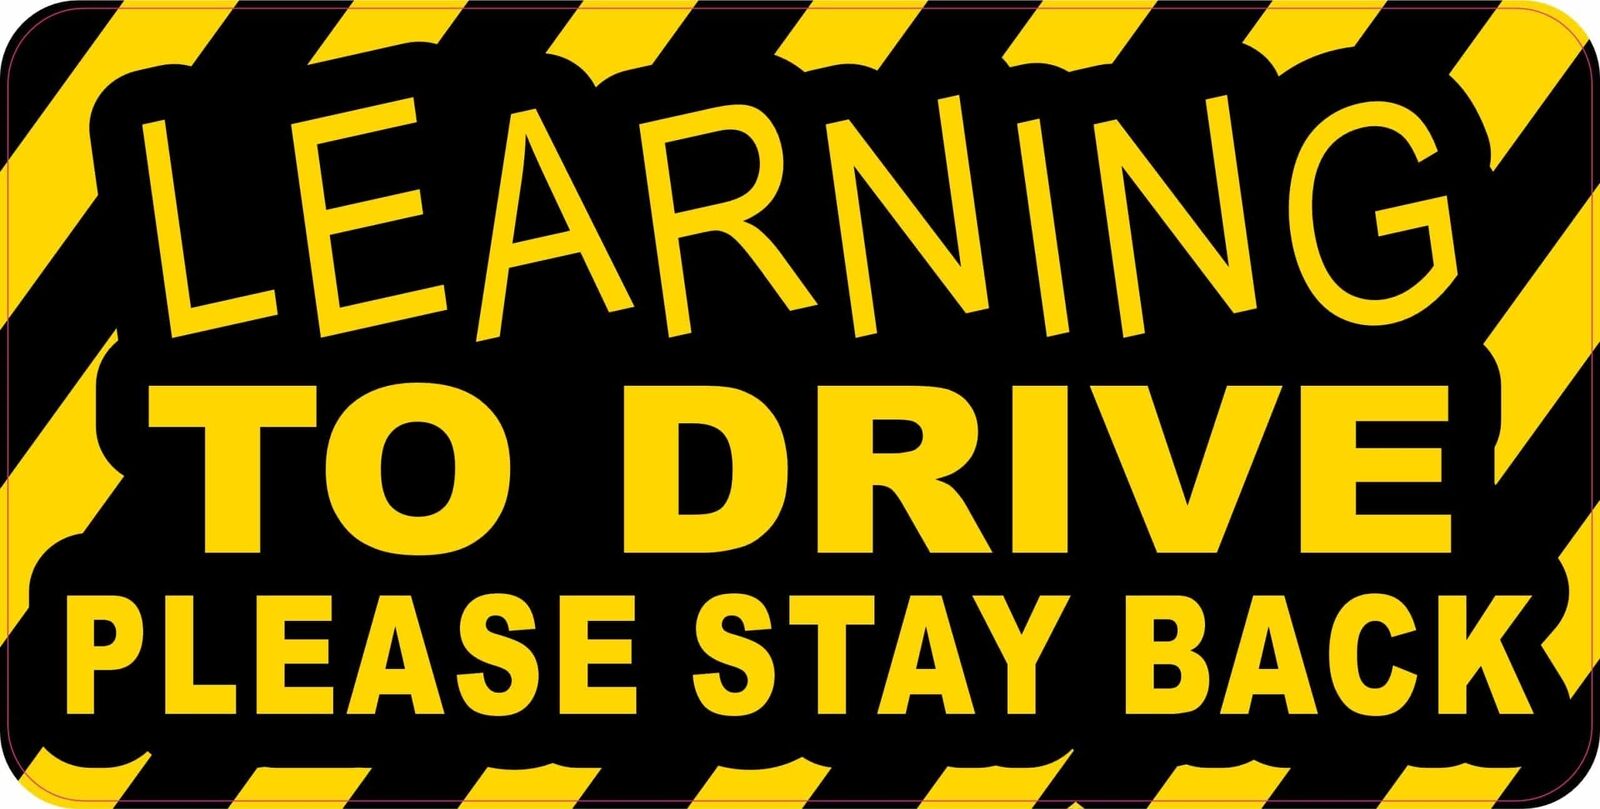 StickerTalk Learning To Drive Please Stay Back Sticker, 10 inches x 5 inches